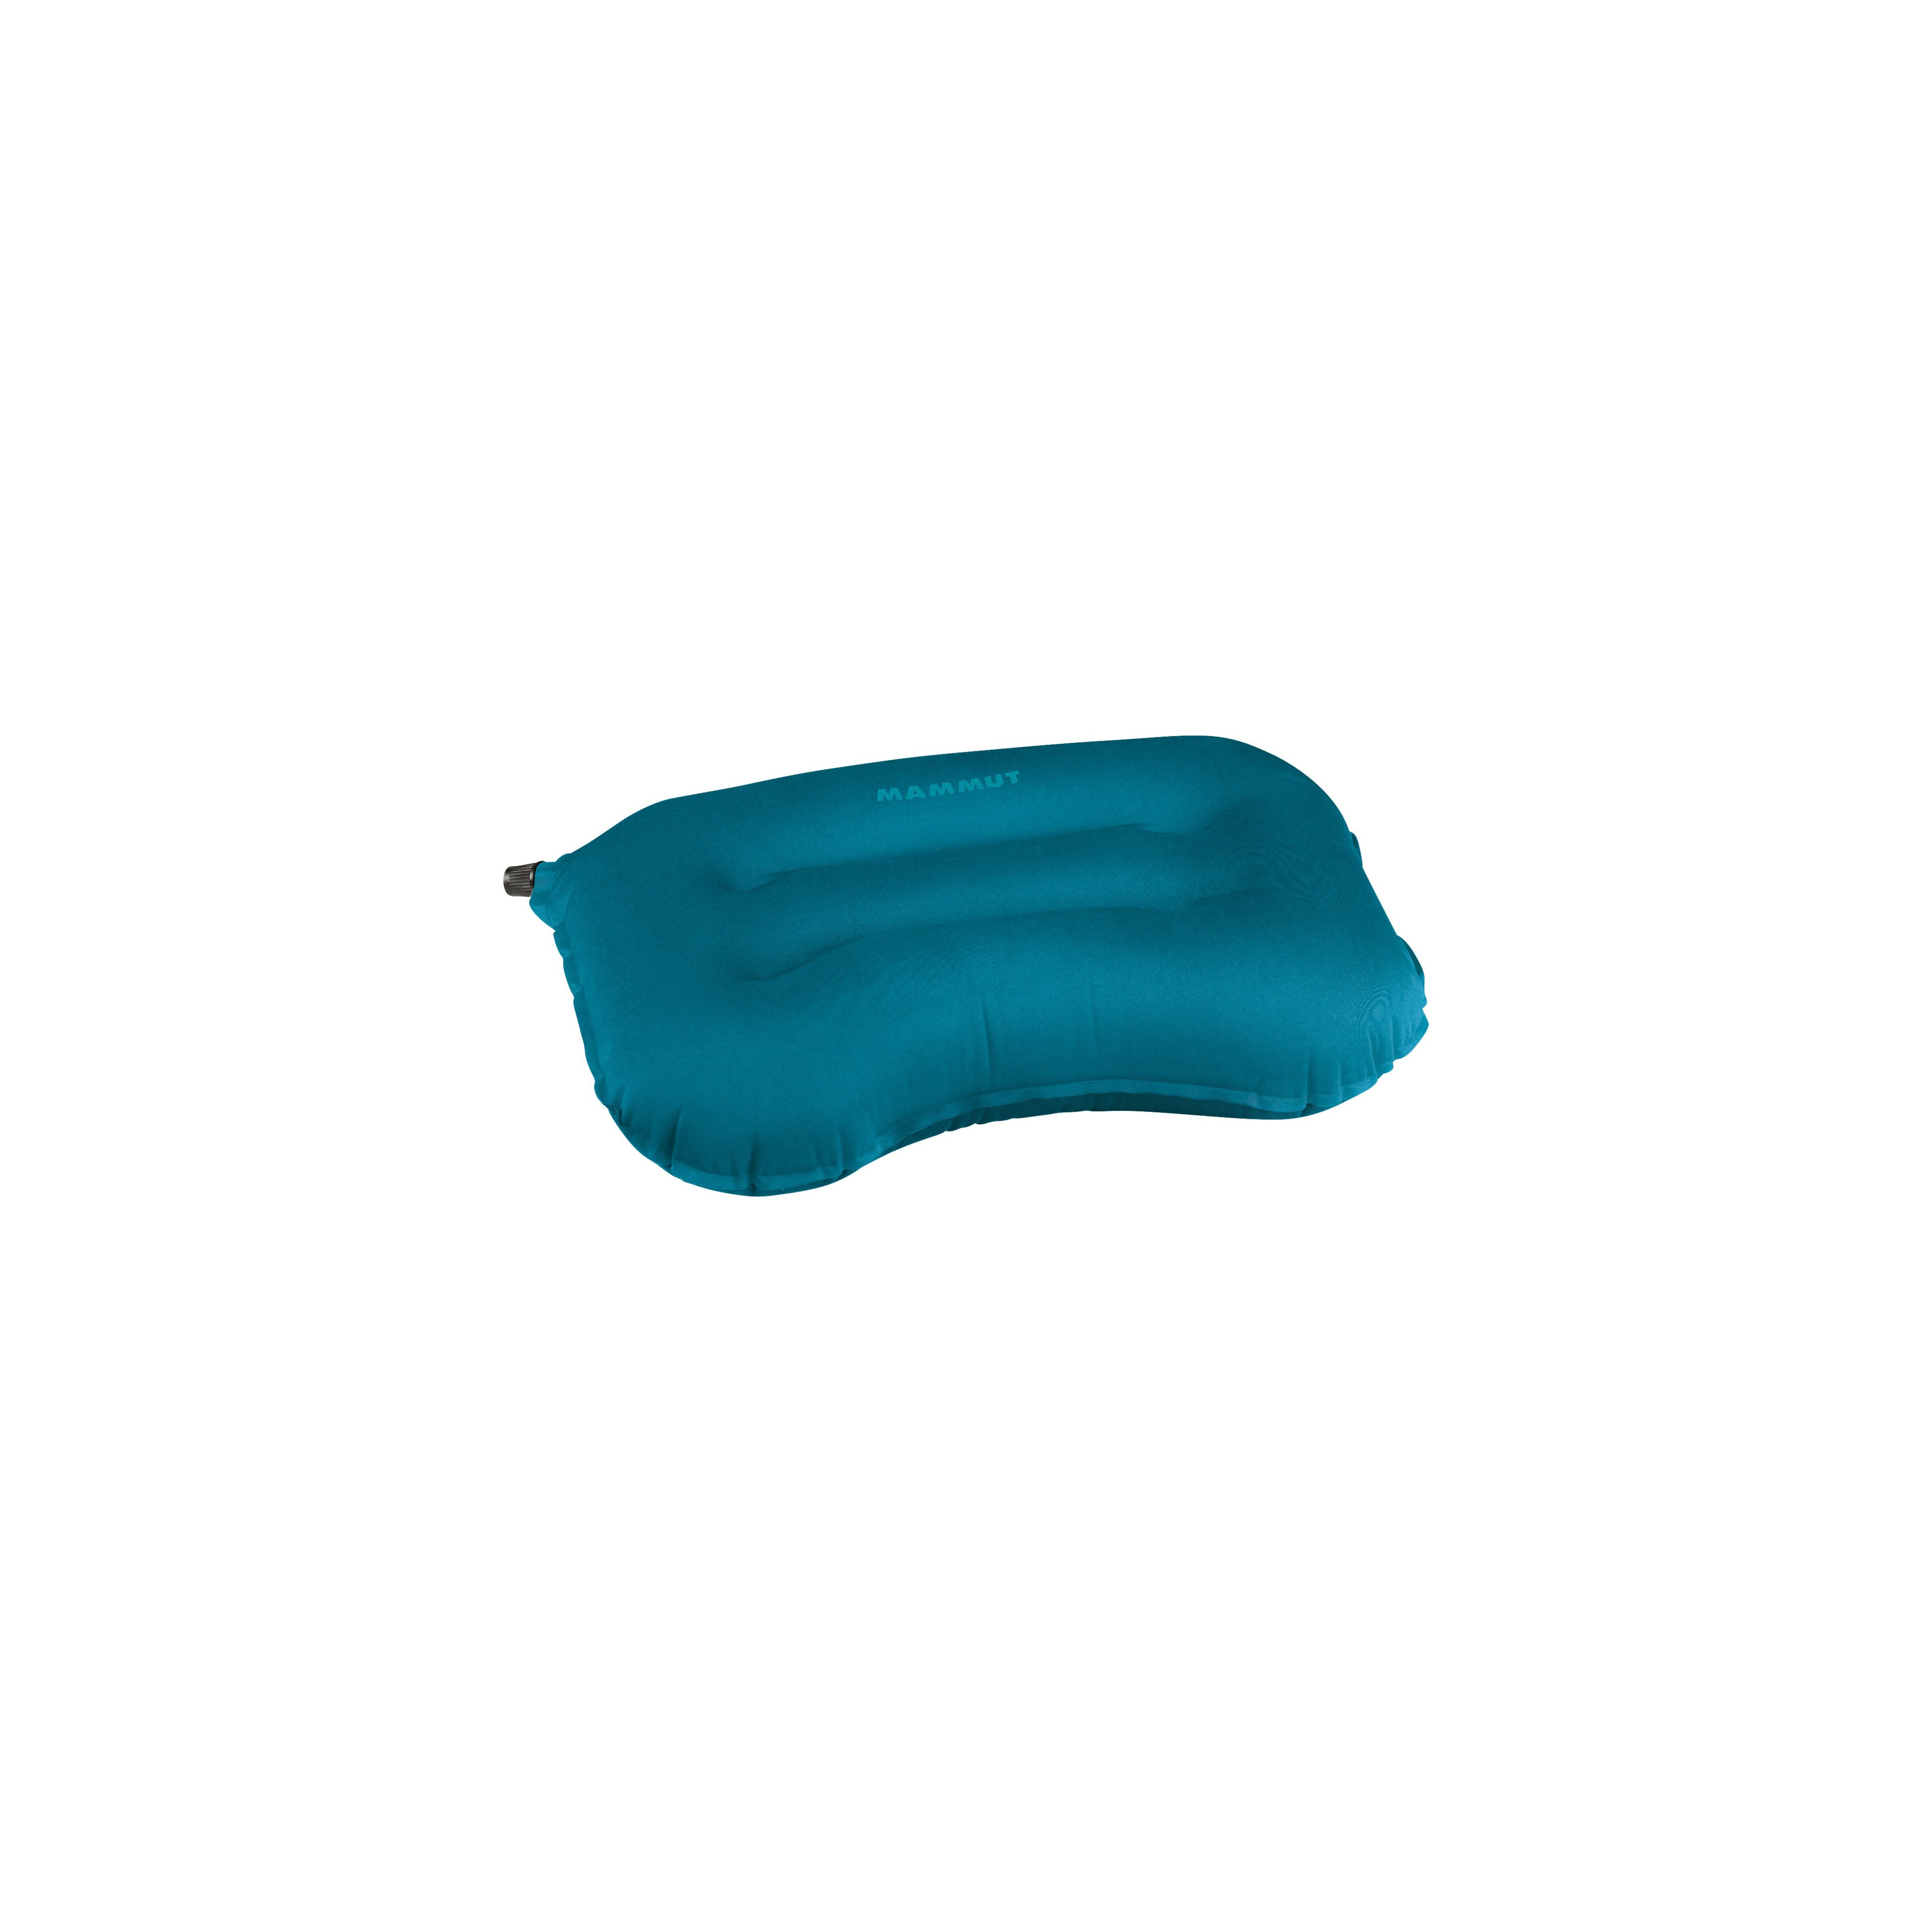 Ergonomic Pillow CFT - dark pacific, one size product image